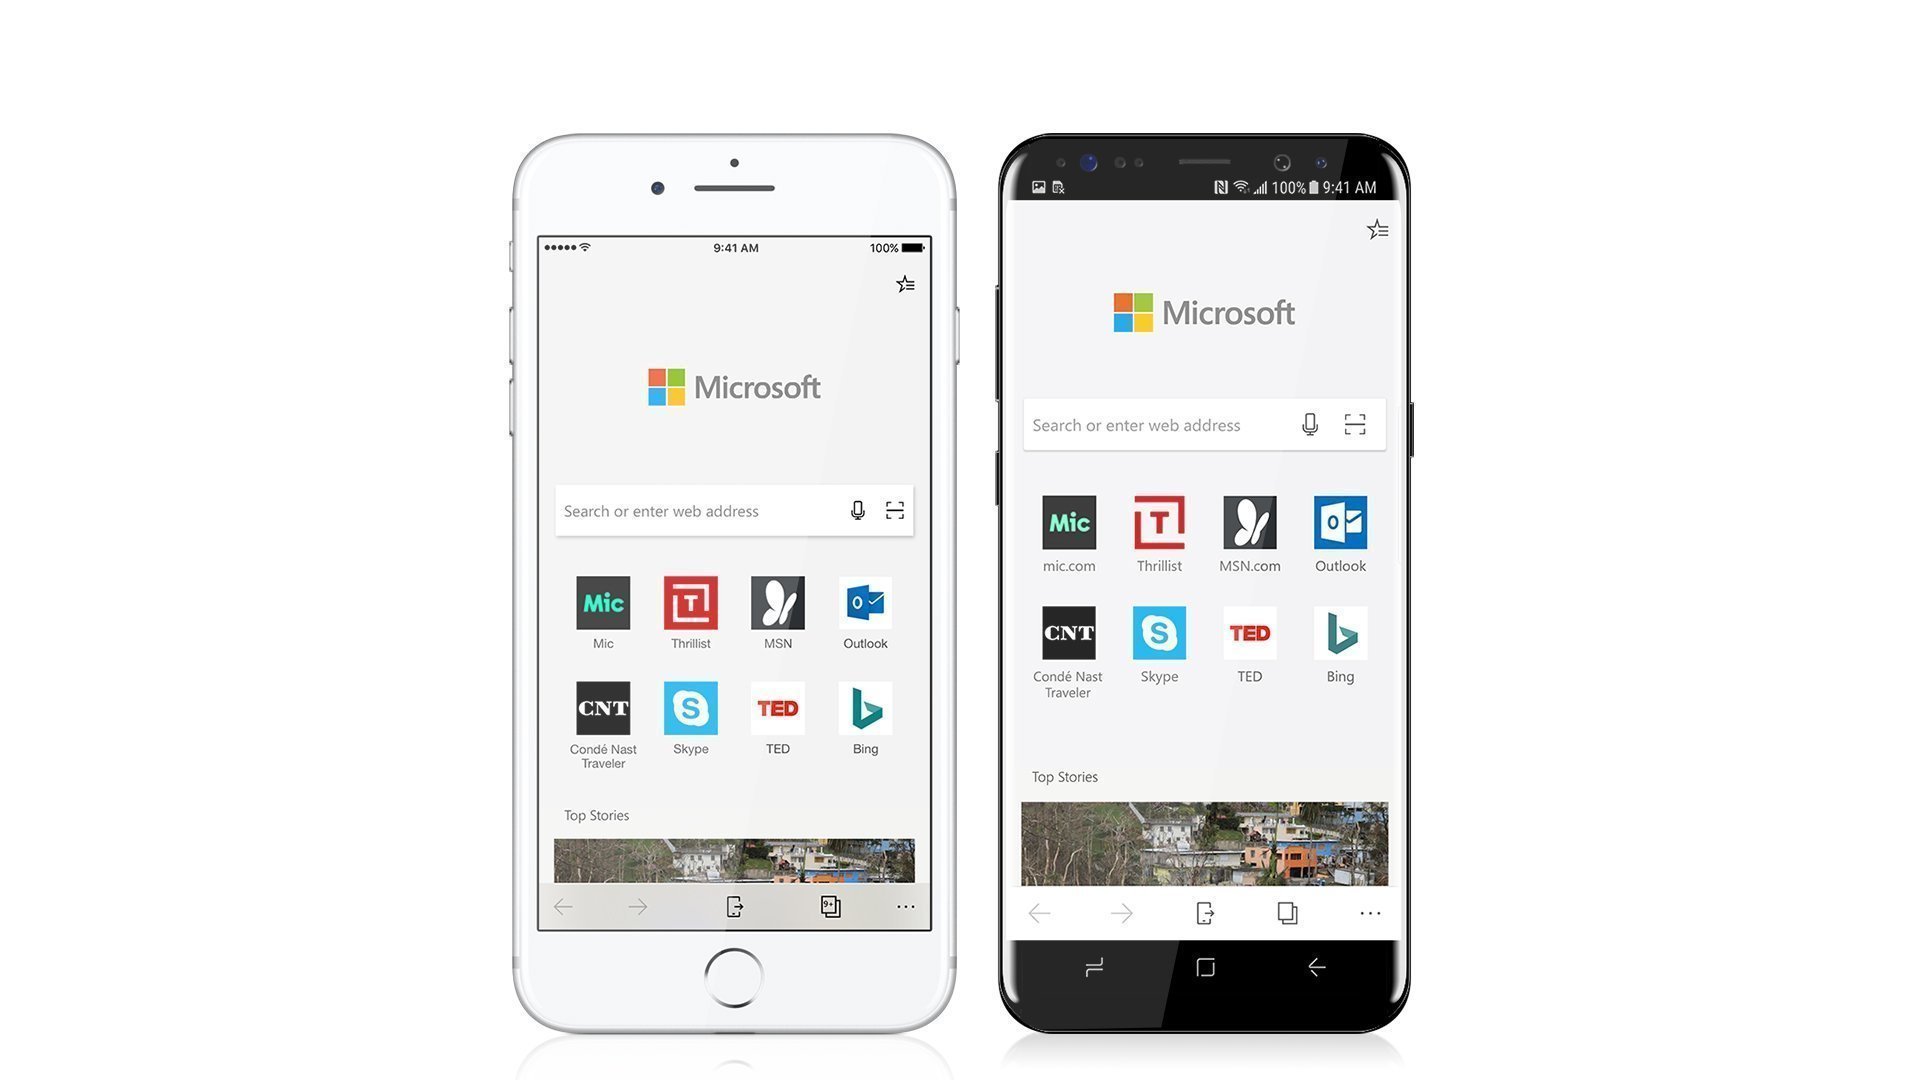 Microsoft Edge Beta for iOS receives new features for iPad users c3625ec77ea6463f8af52d0cae5d3541.jpg